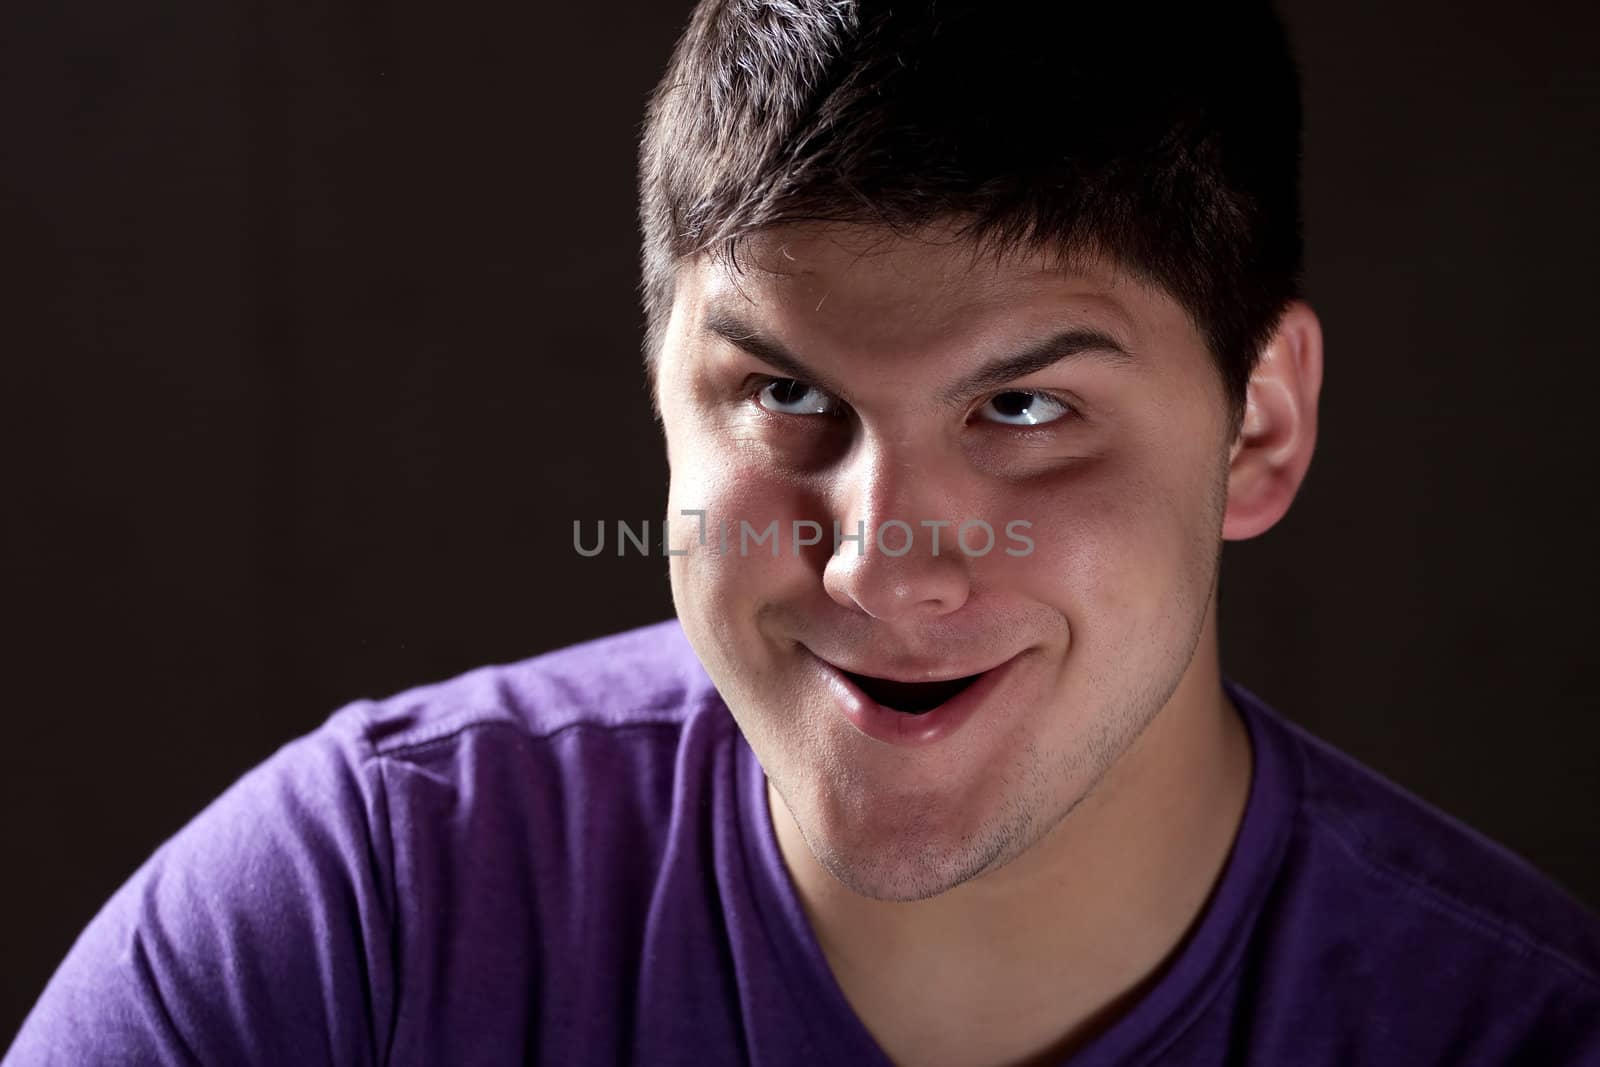 A young man goofing around with a funny expression on his face.